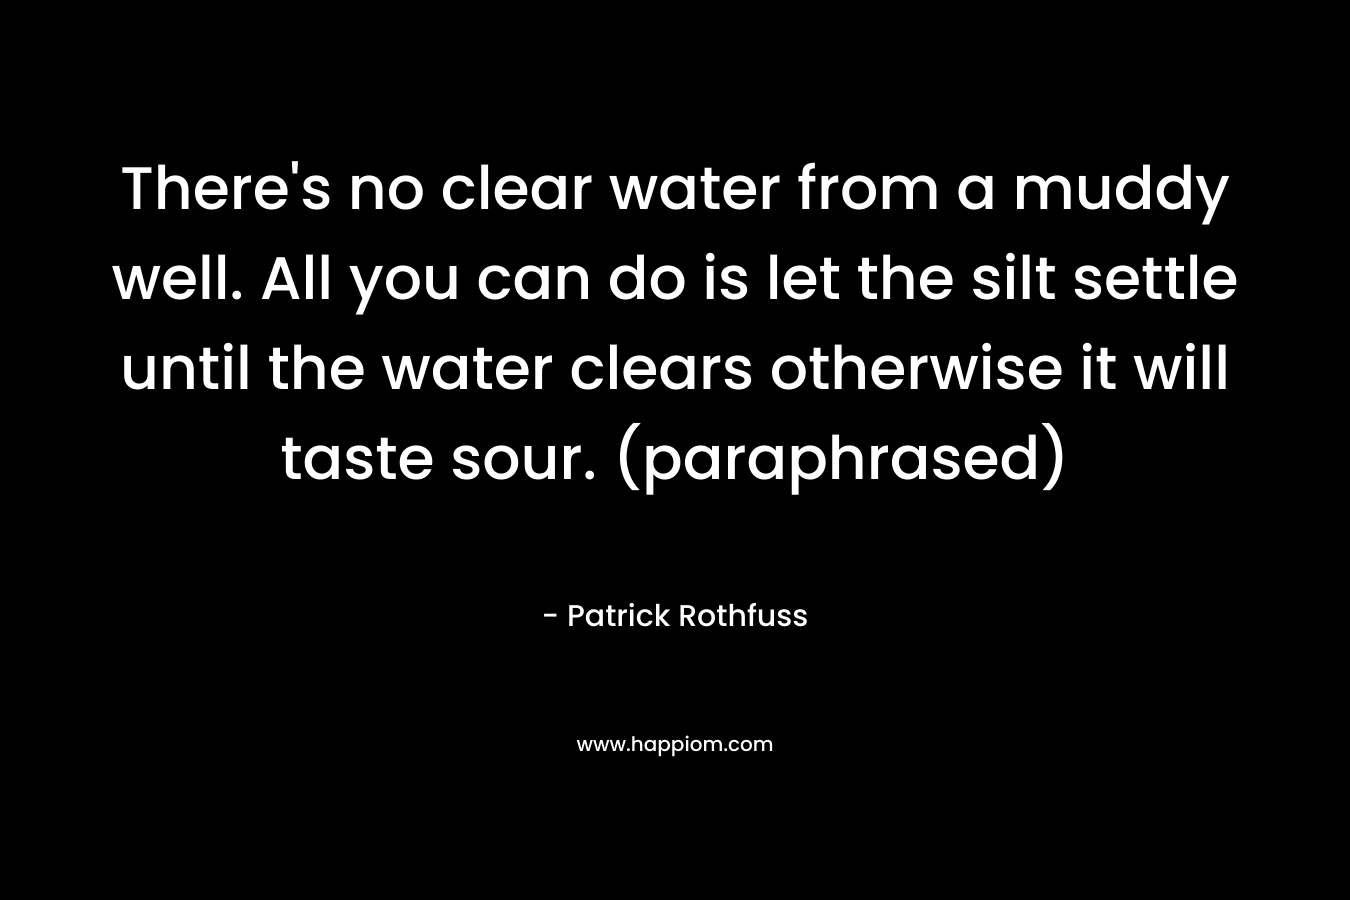 There’s no clear water from a muddy well. All you can do is let the silt settle until the water clears otherwise it will taste sour. (paraphrased) – Patrick Rothfuss